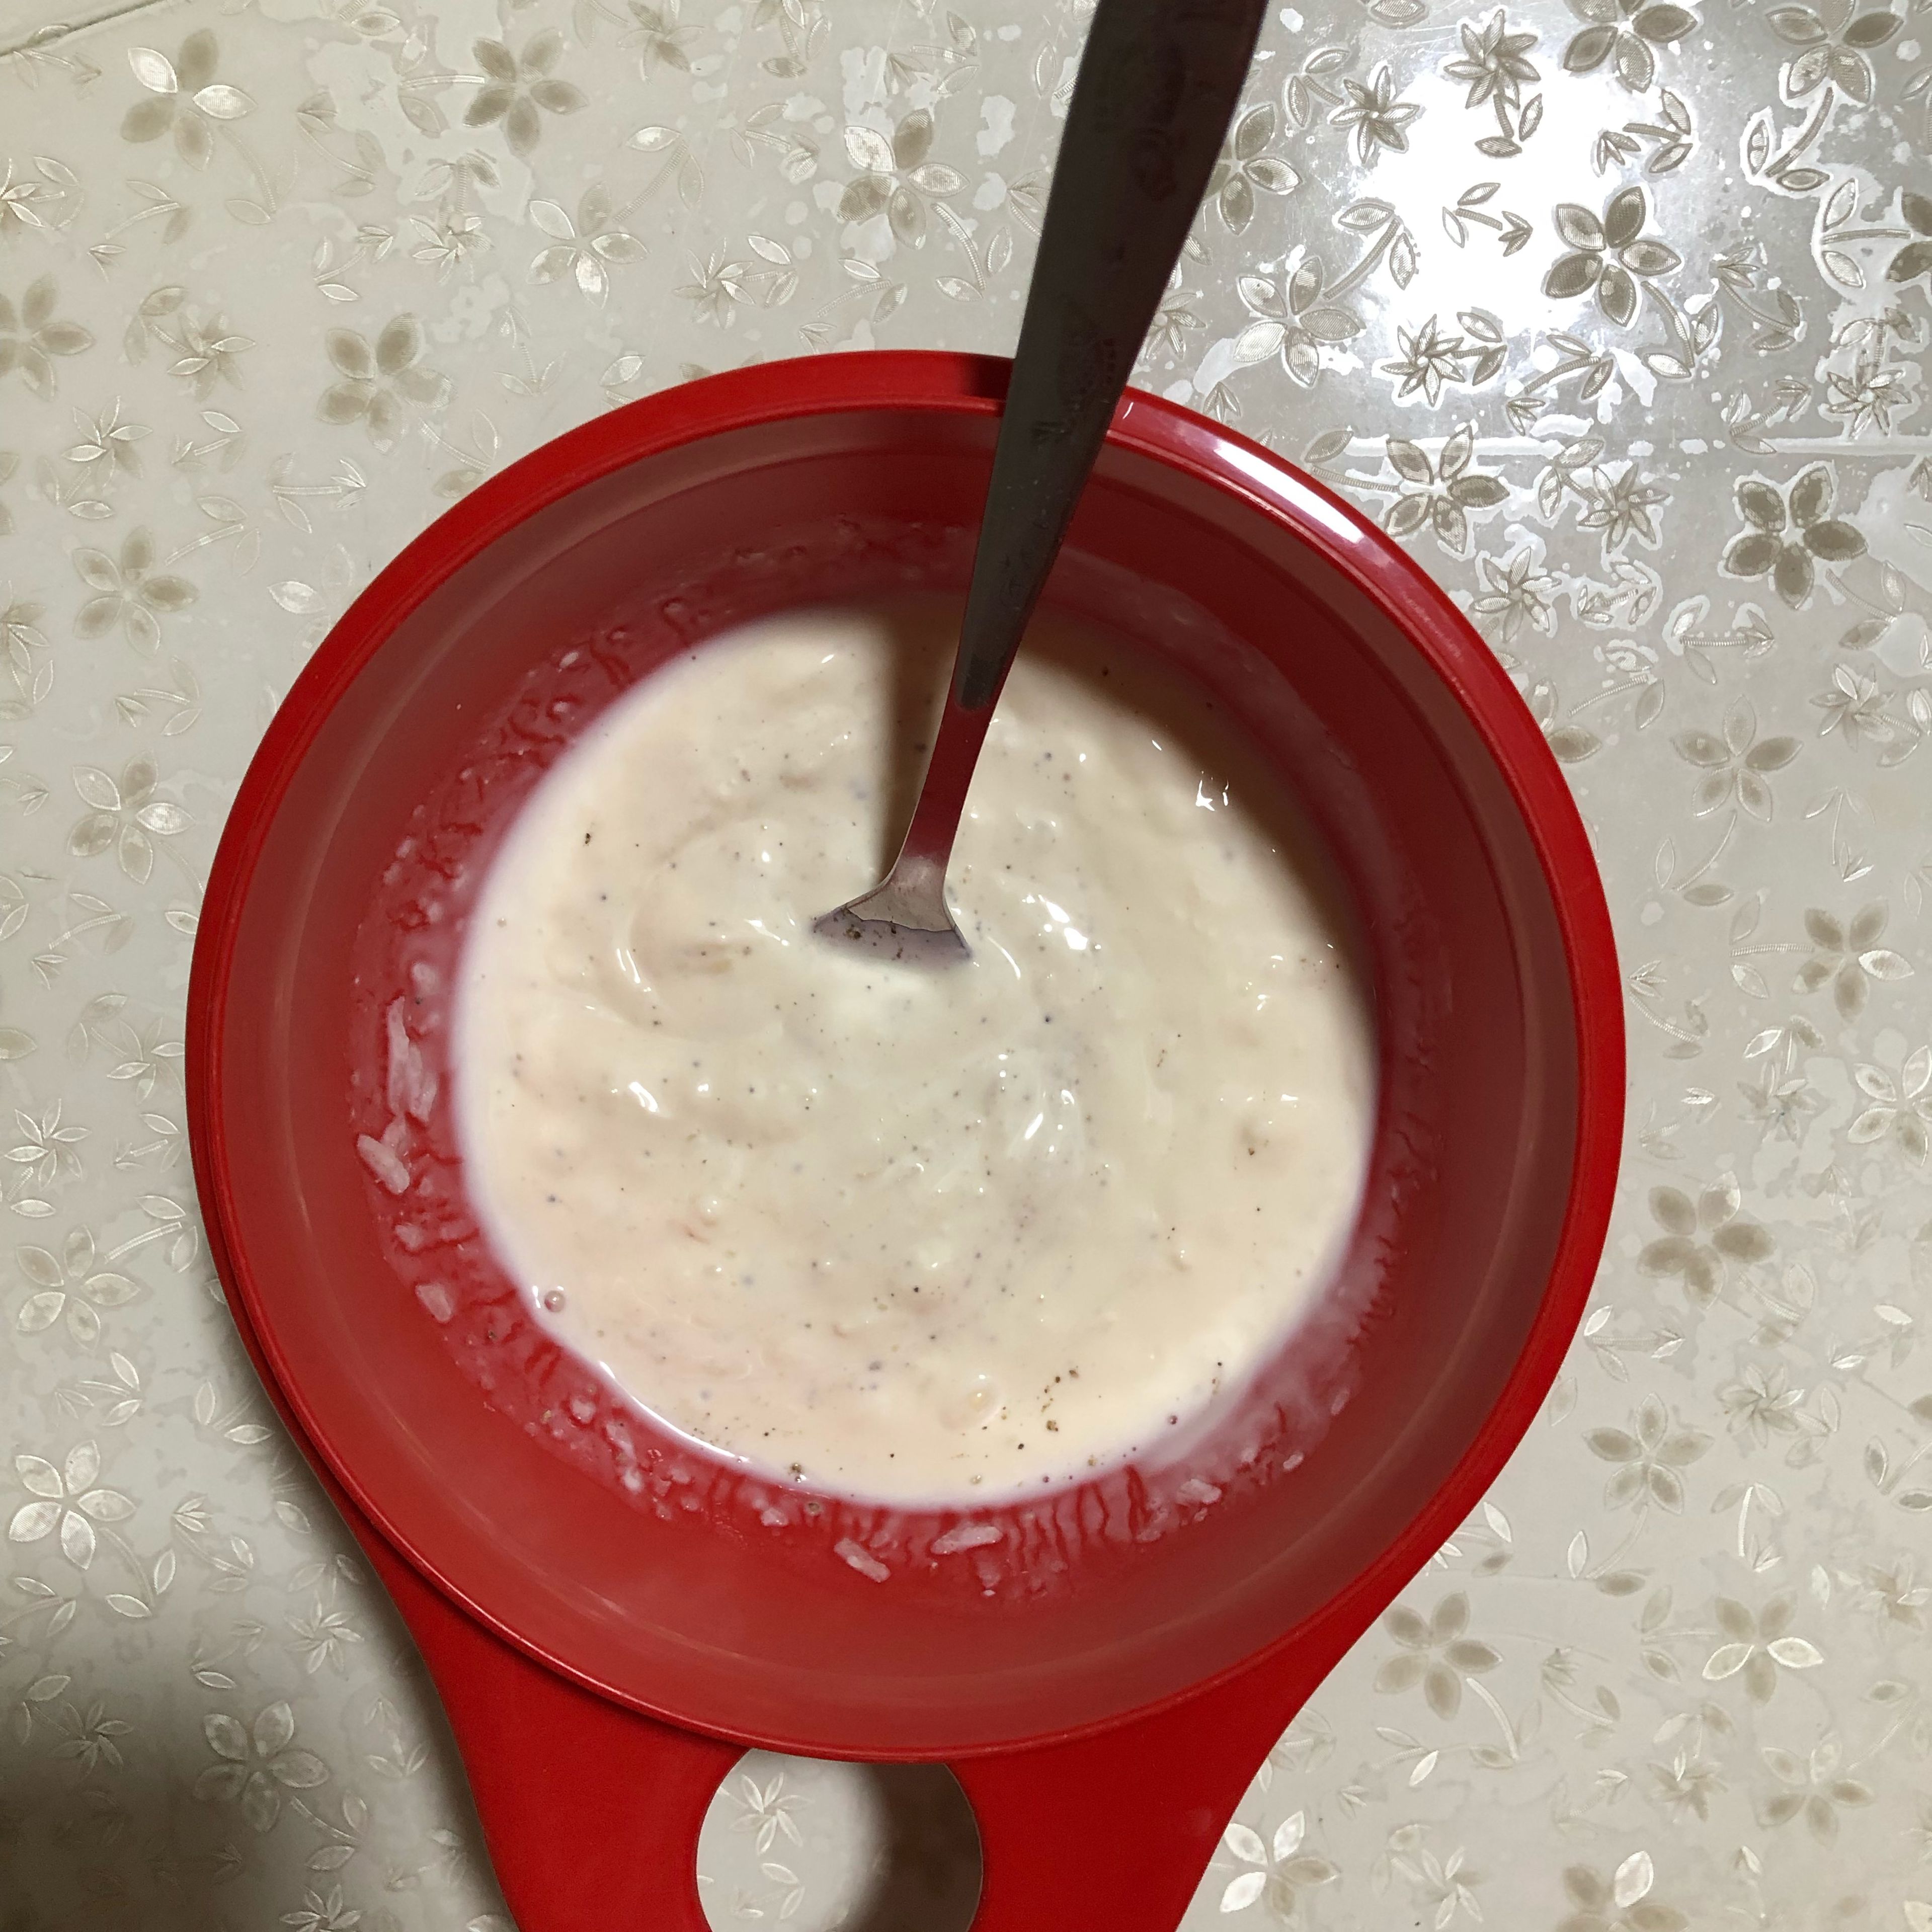 Prepare garlic sauce: mix kefir and mayonnaise in 1:1, add finely grated garlic to it. Mix it good and season with black pepper. Sauce is ready. Serve it in individual bowls, as everyone would dip their galnash into the sauce. Enjoy!